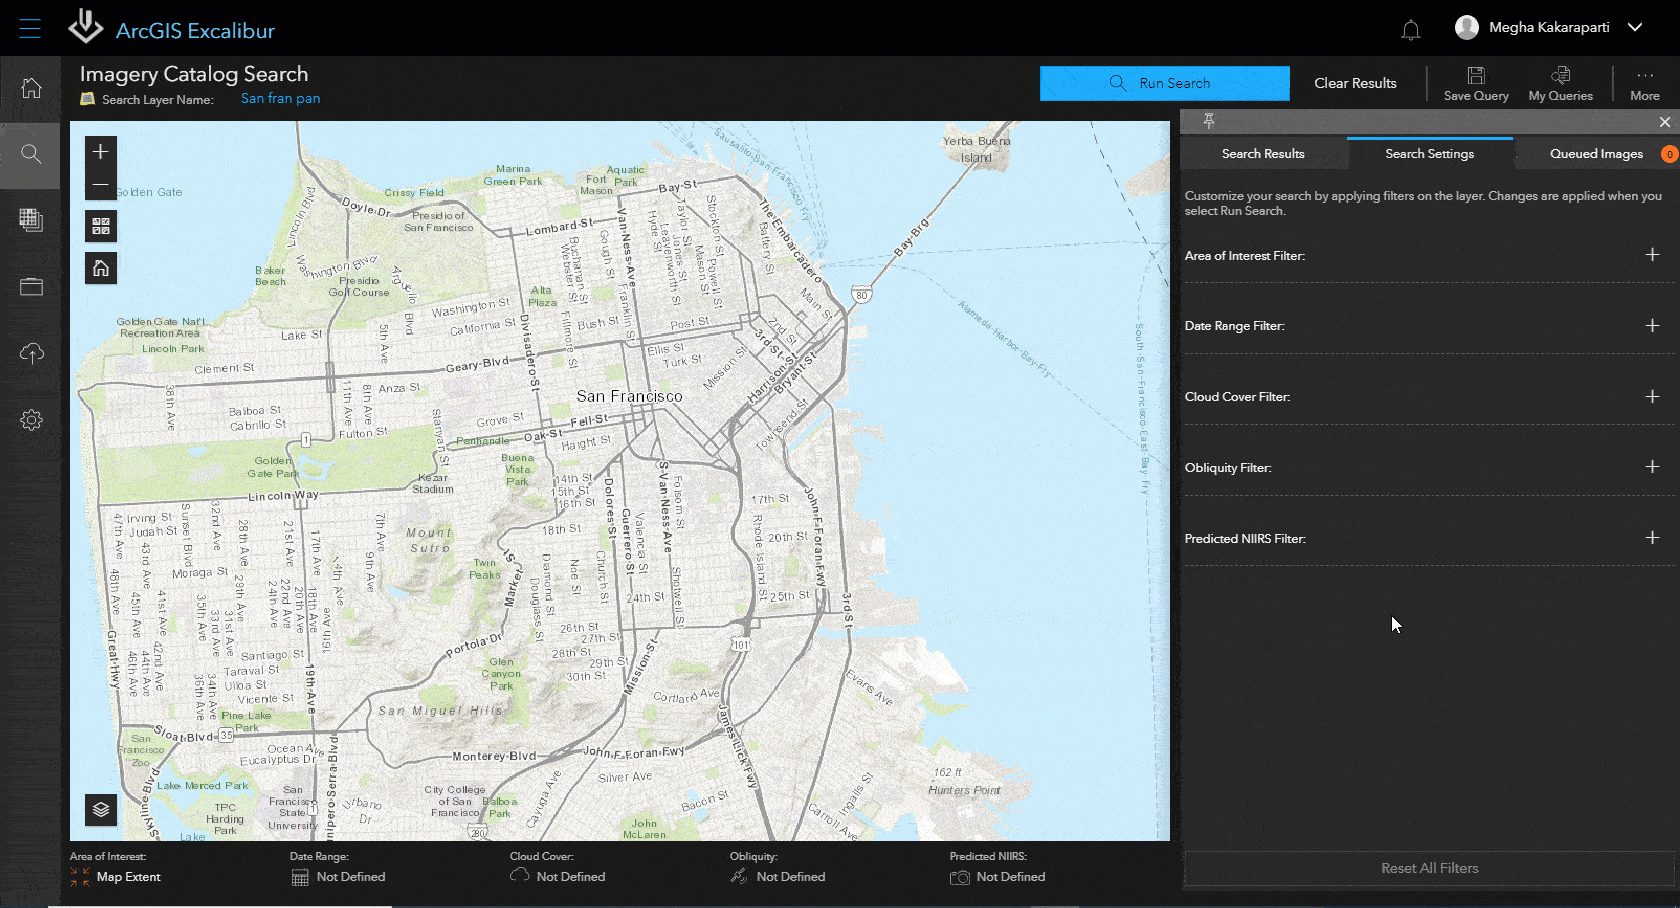 A digital map of San Francisco with red lines in a square representing an available imagery search in ArcGIS Excalibur 